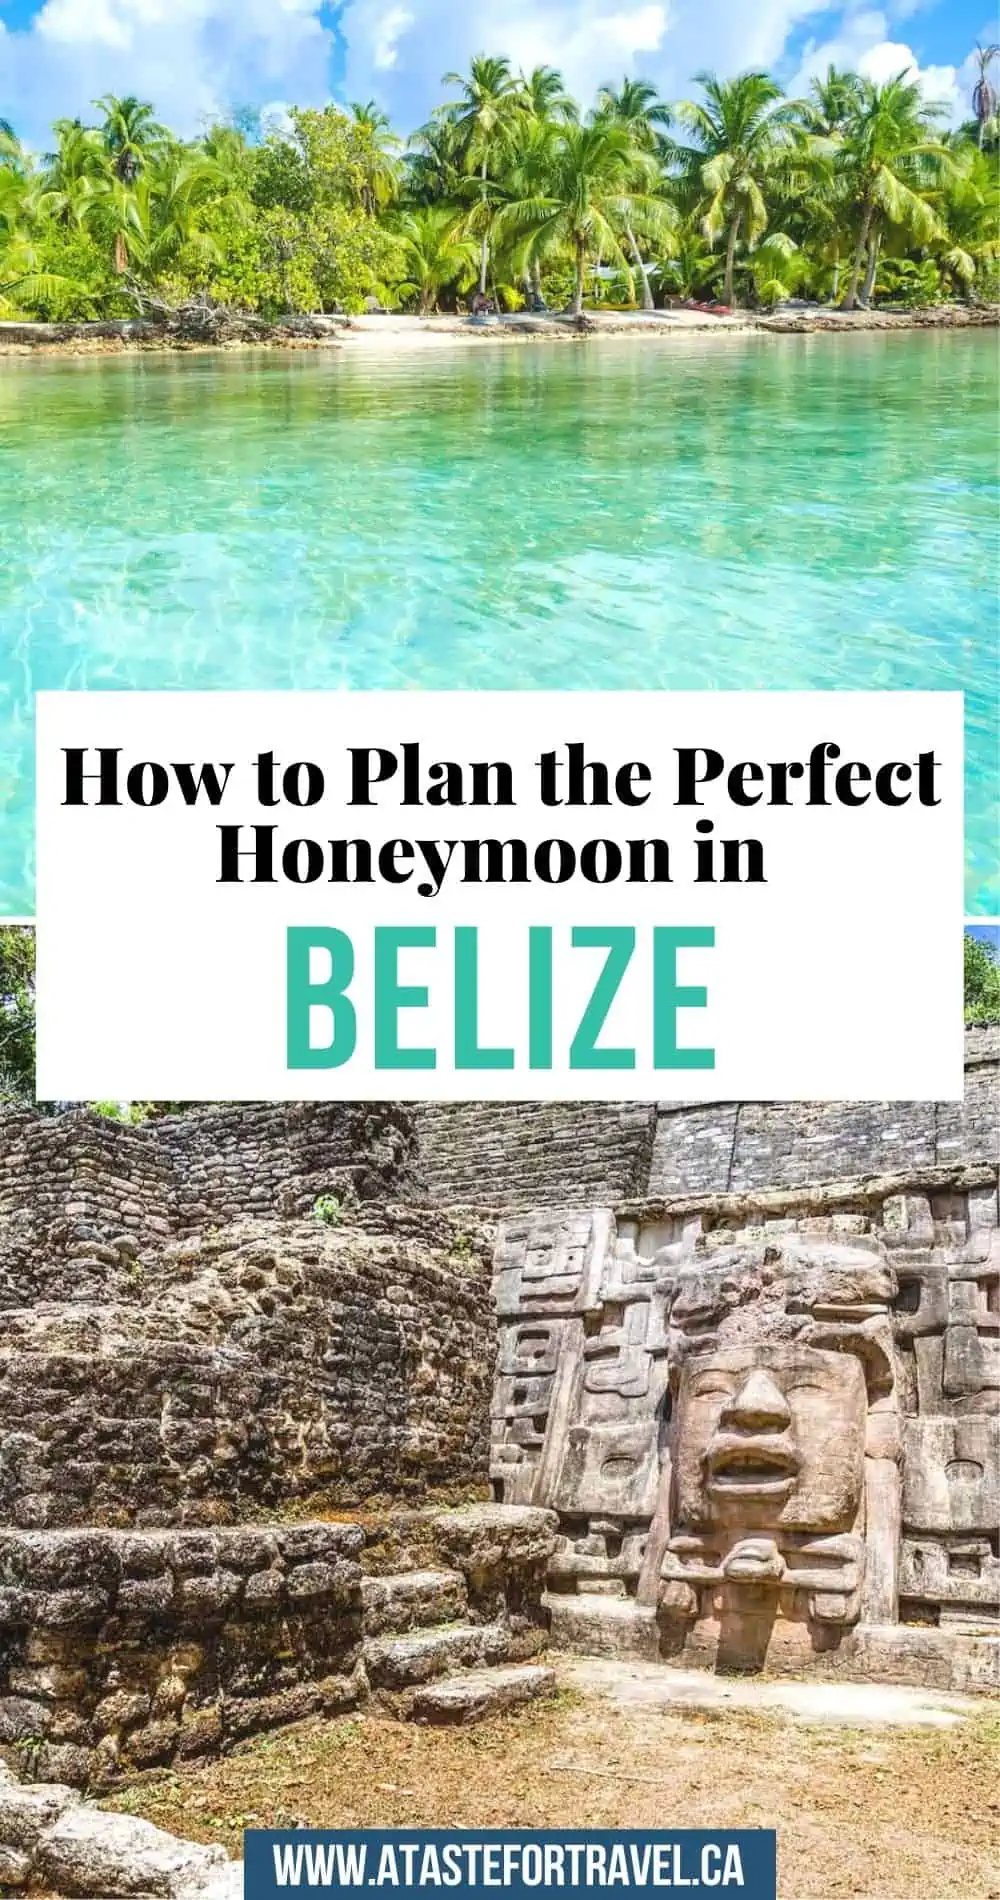 Collage of images of Belize for Pinterest.